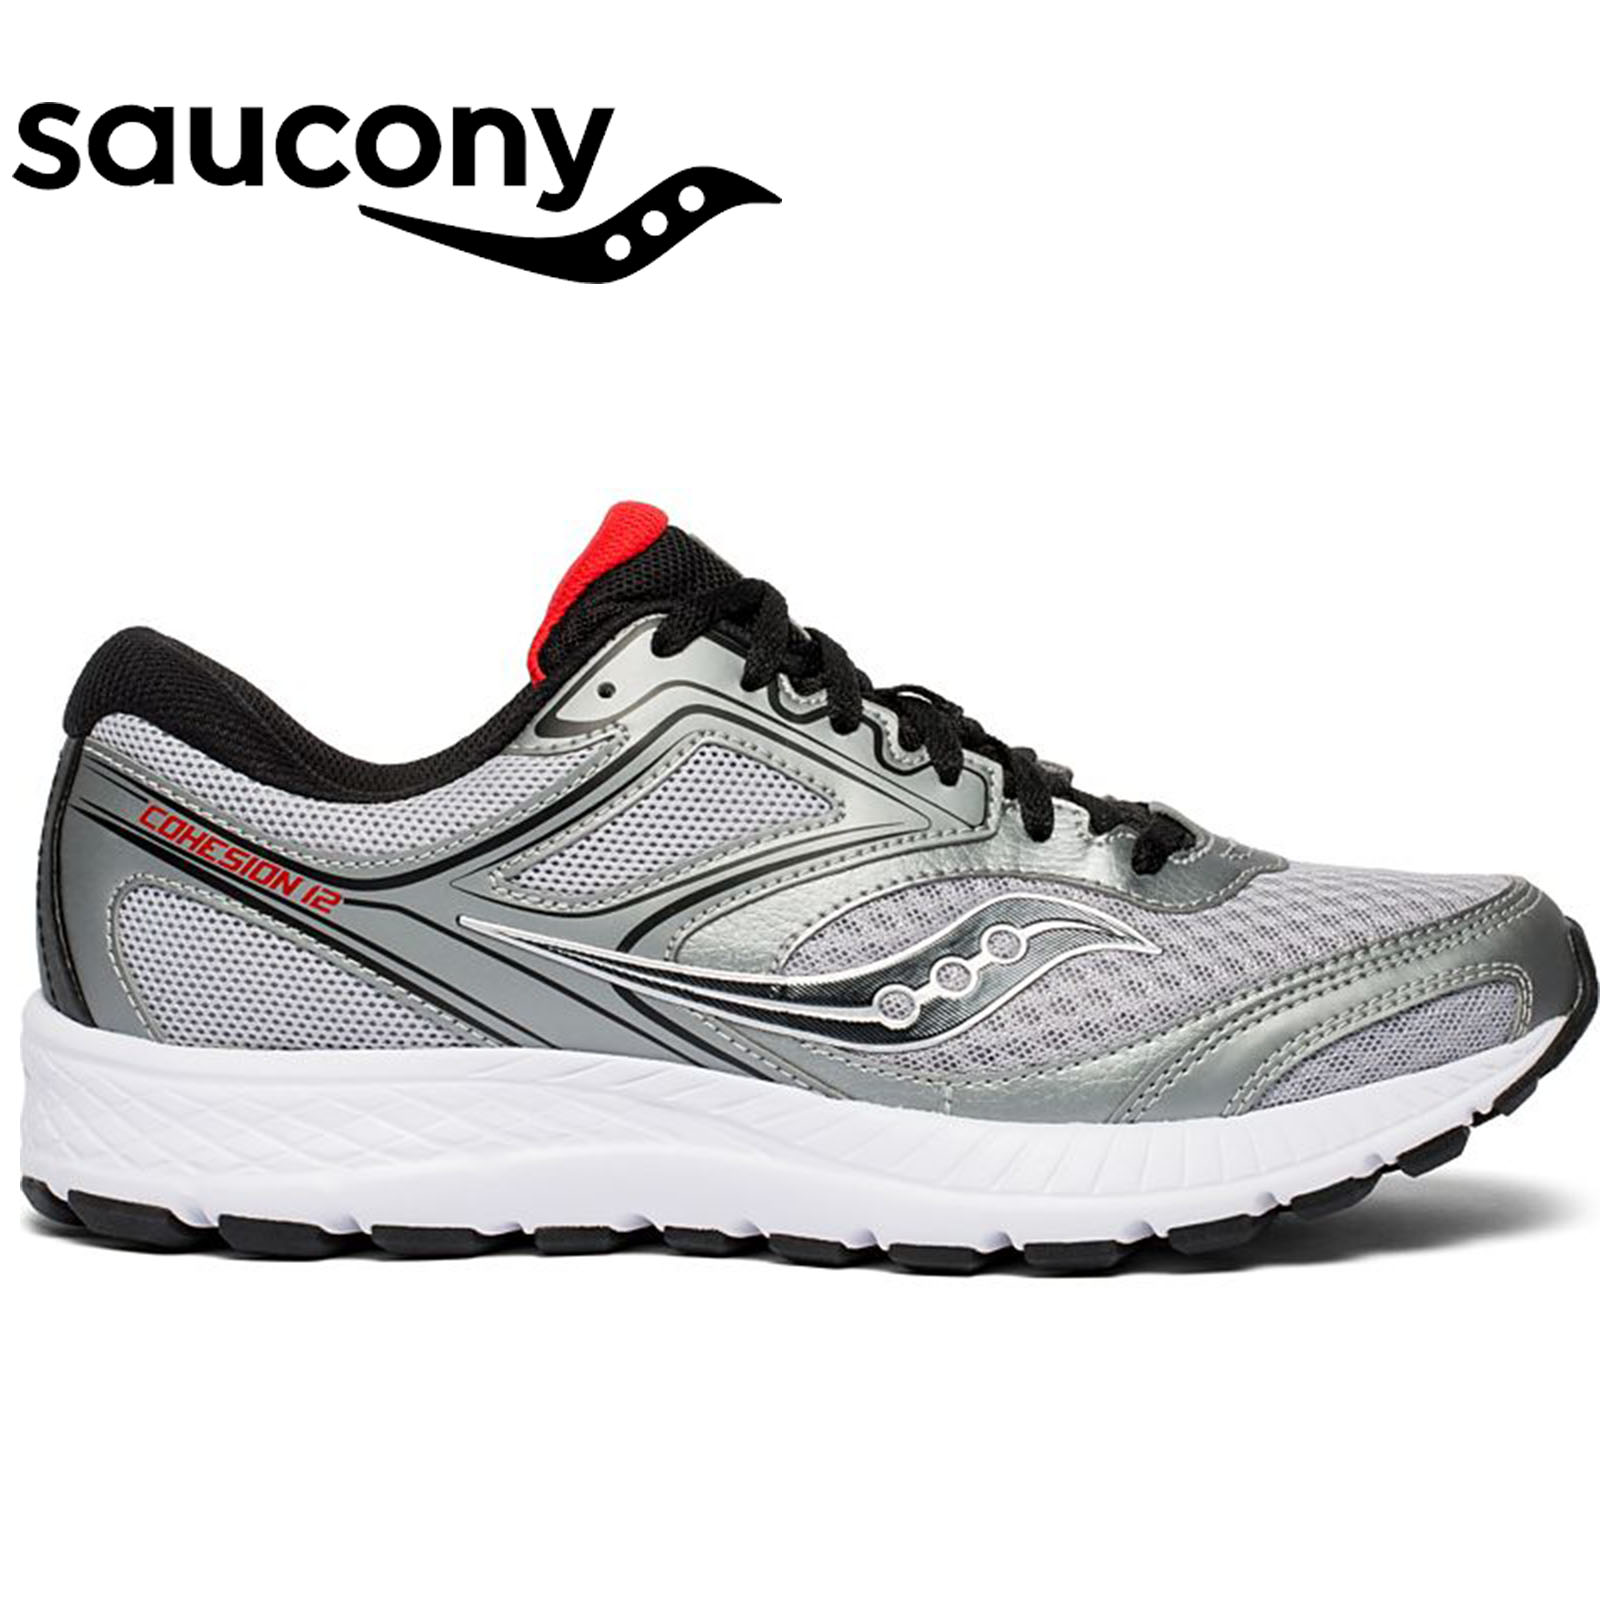 saucony shoes ethical